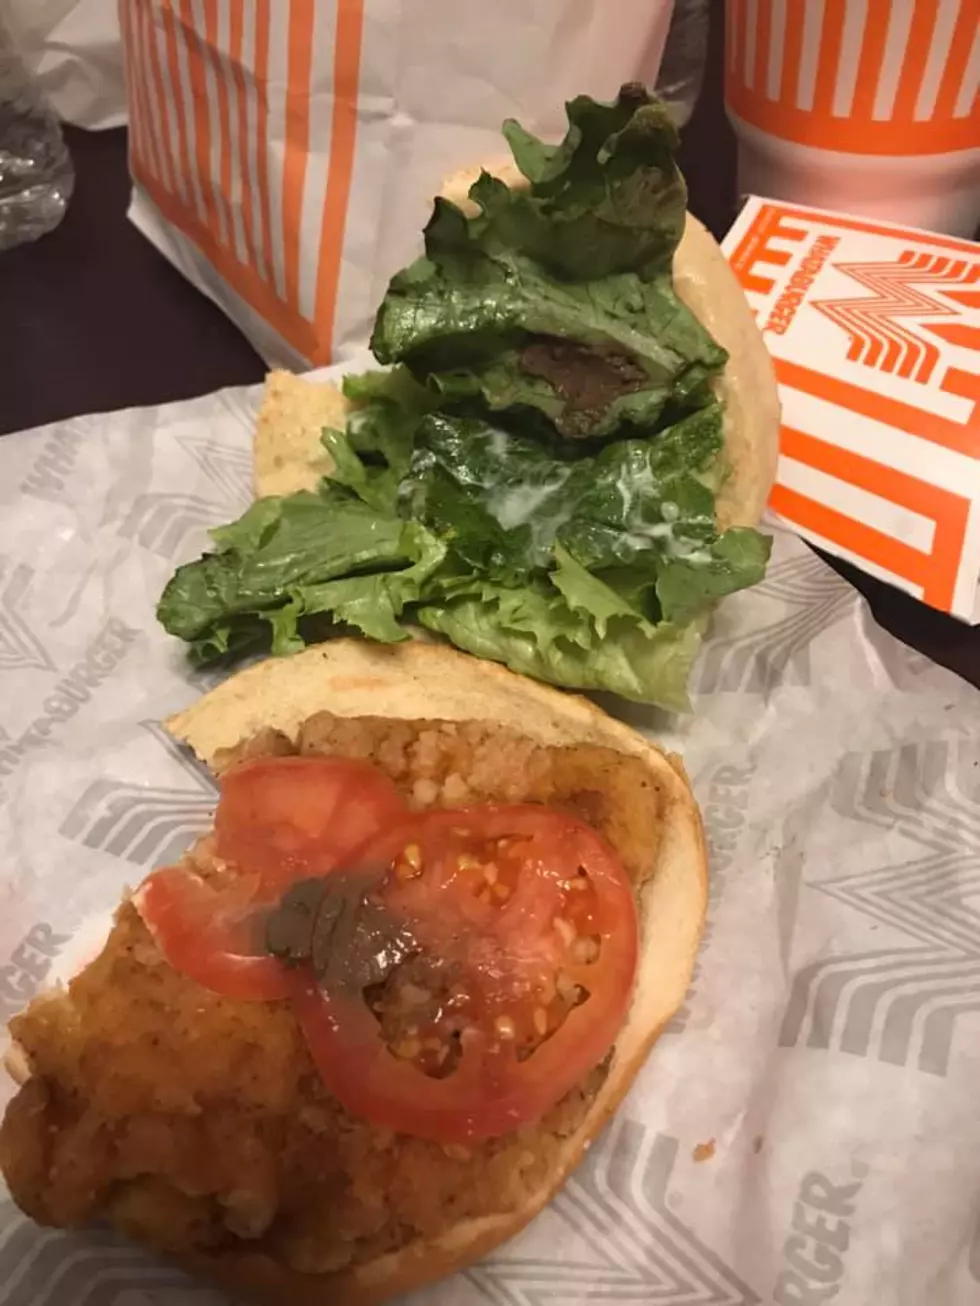 Texas Woman Claims Employees Put a Clump of Mud In Her Whataburger Sandwich